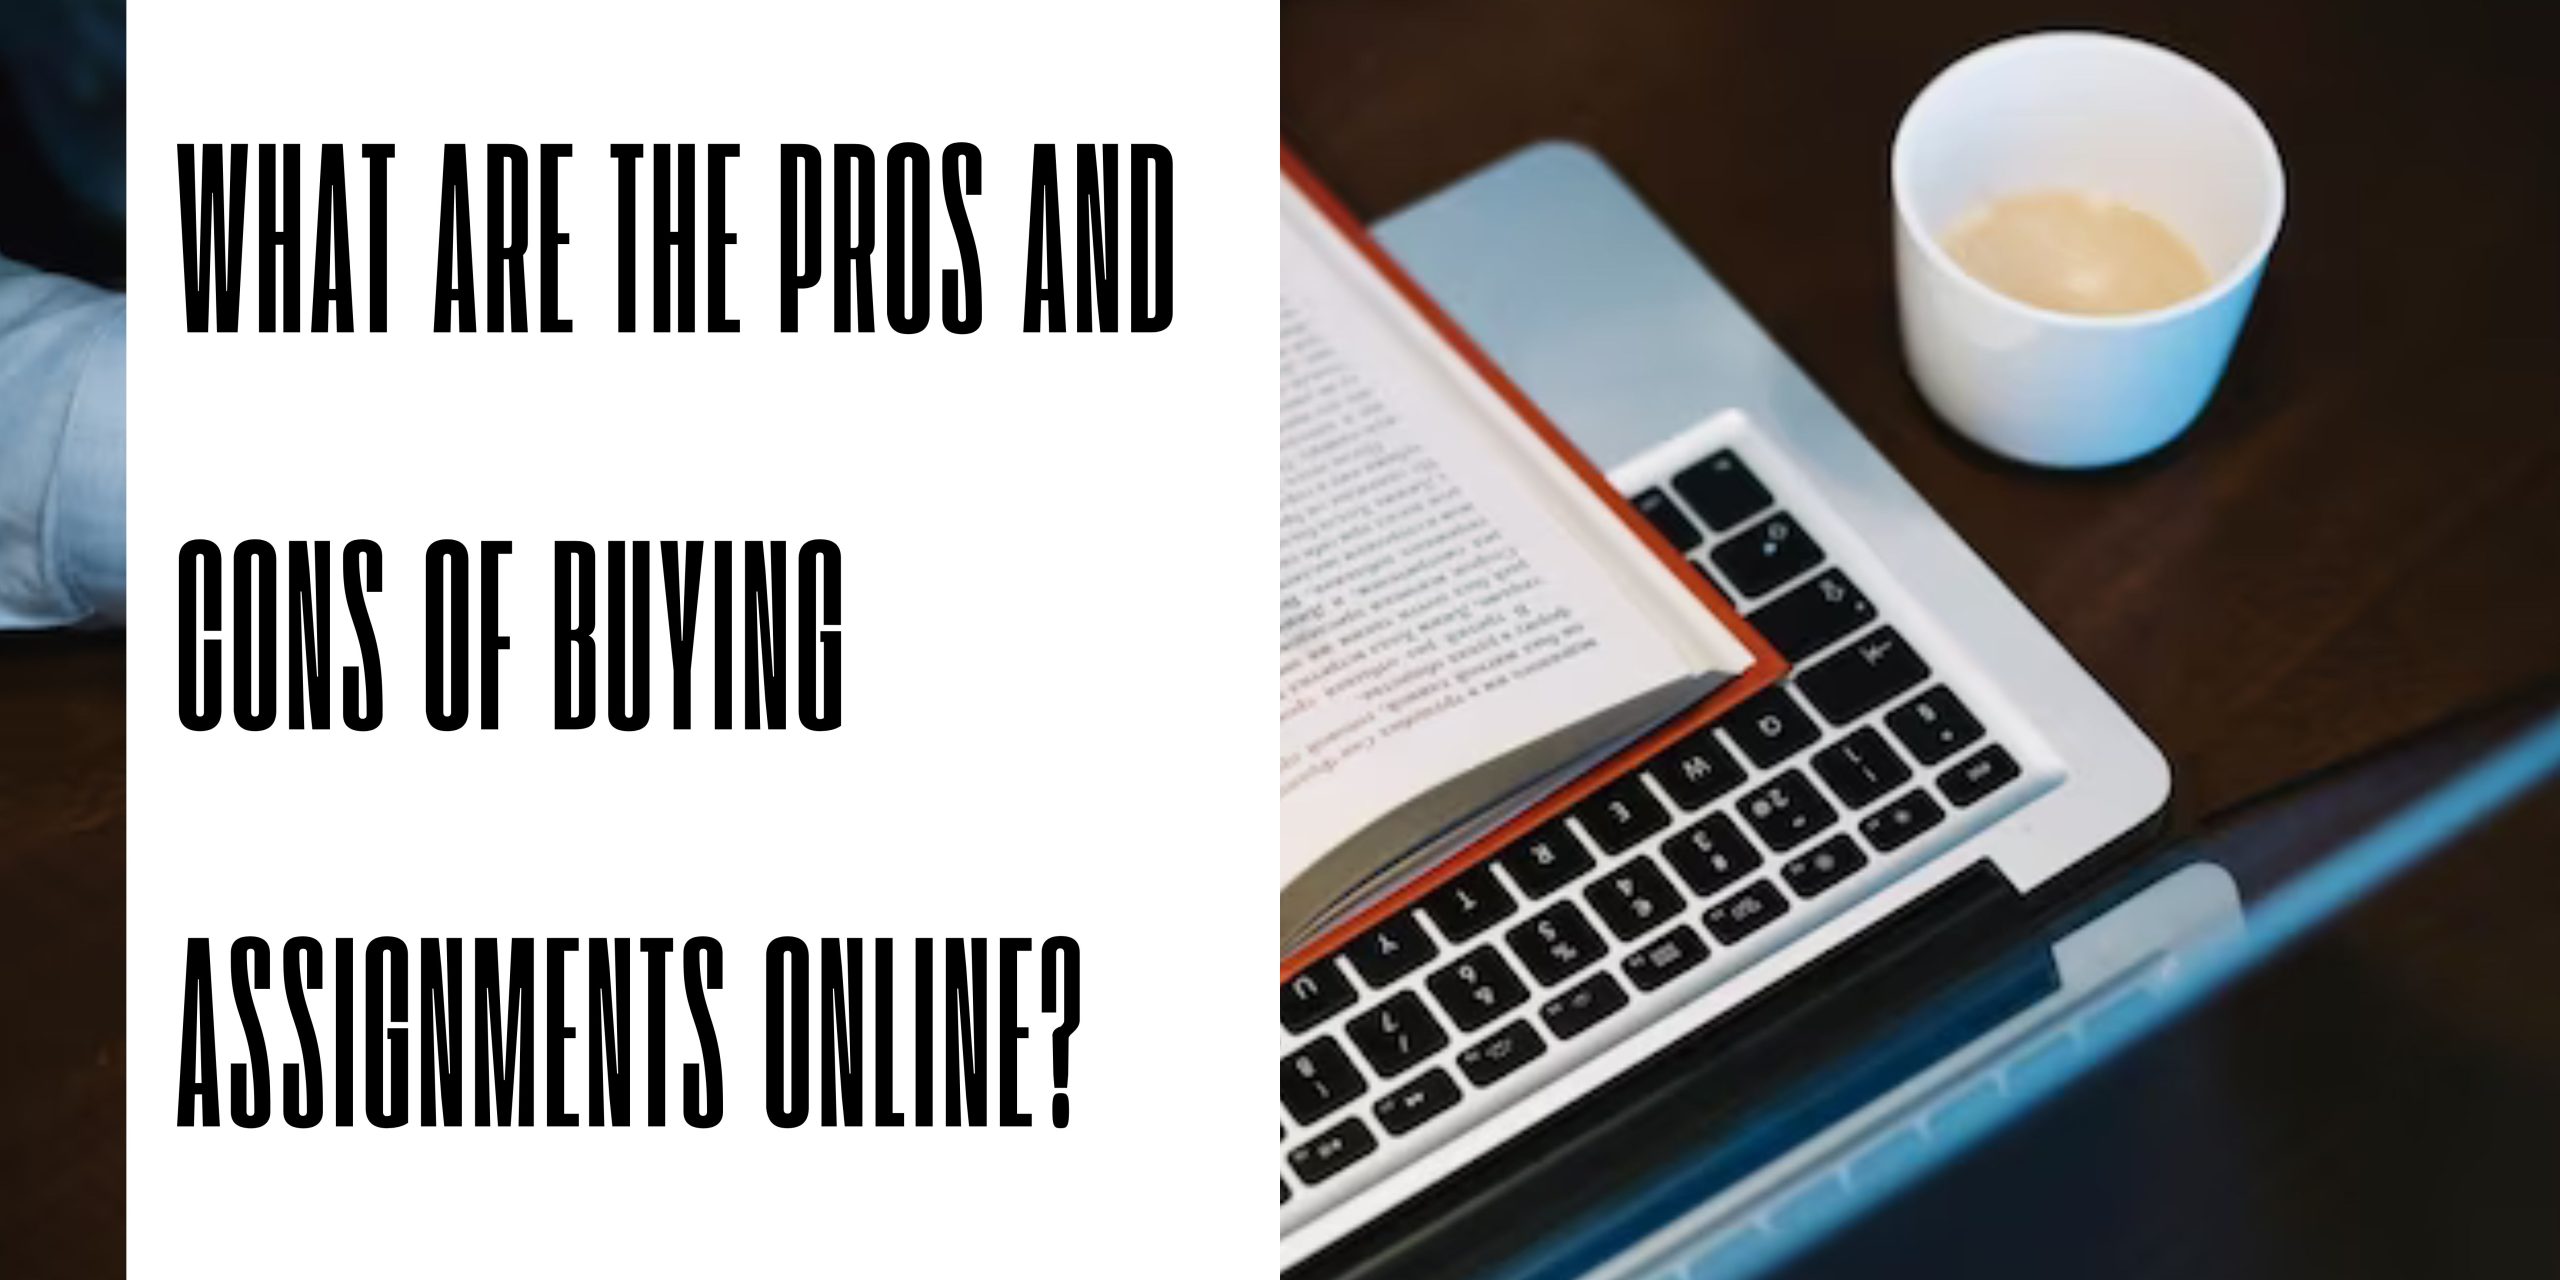 What Are The Pros And Cons Of Buying Assignments Online?